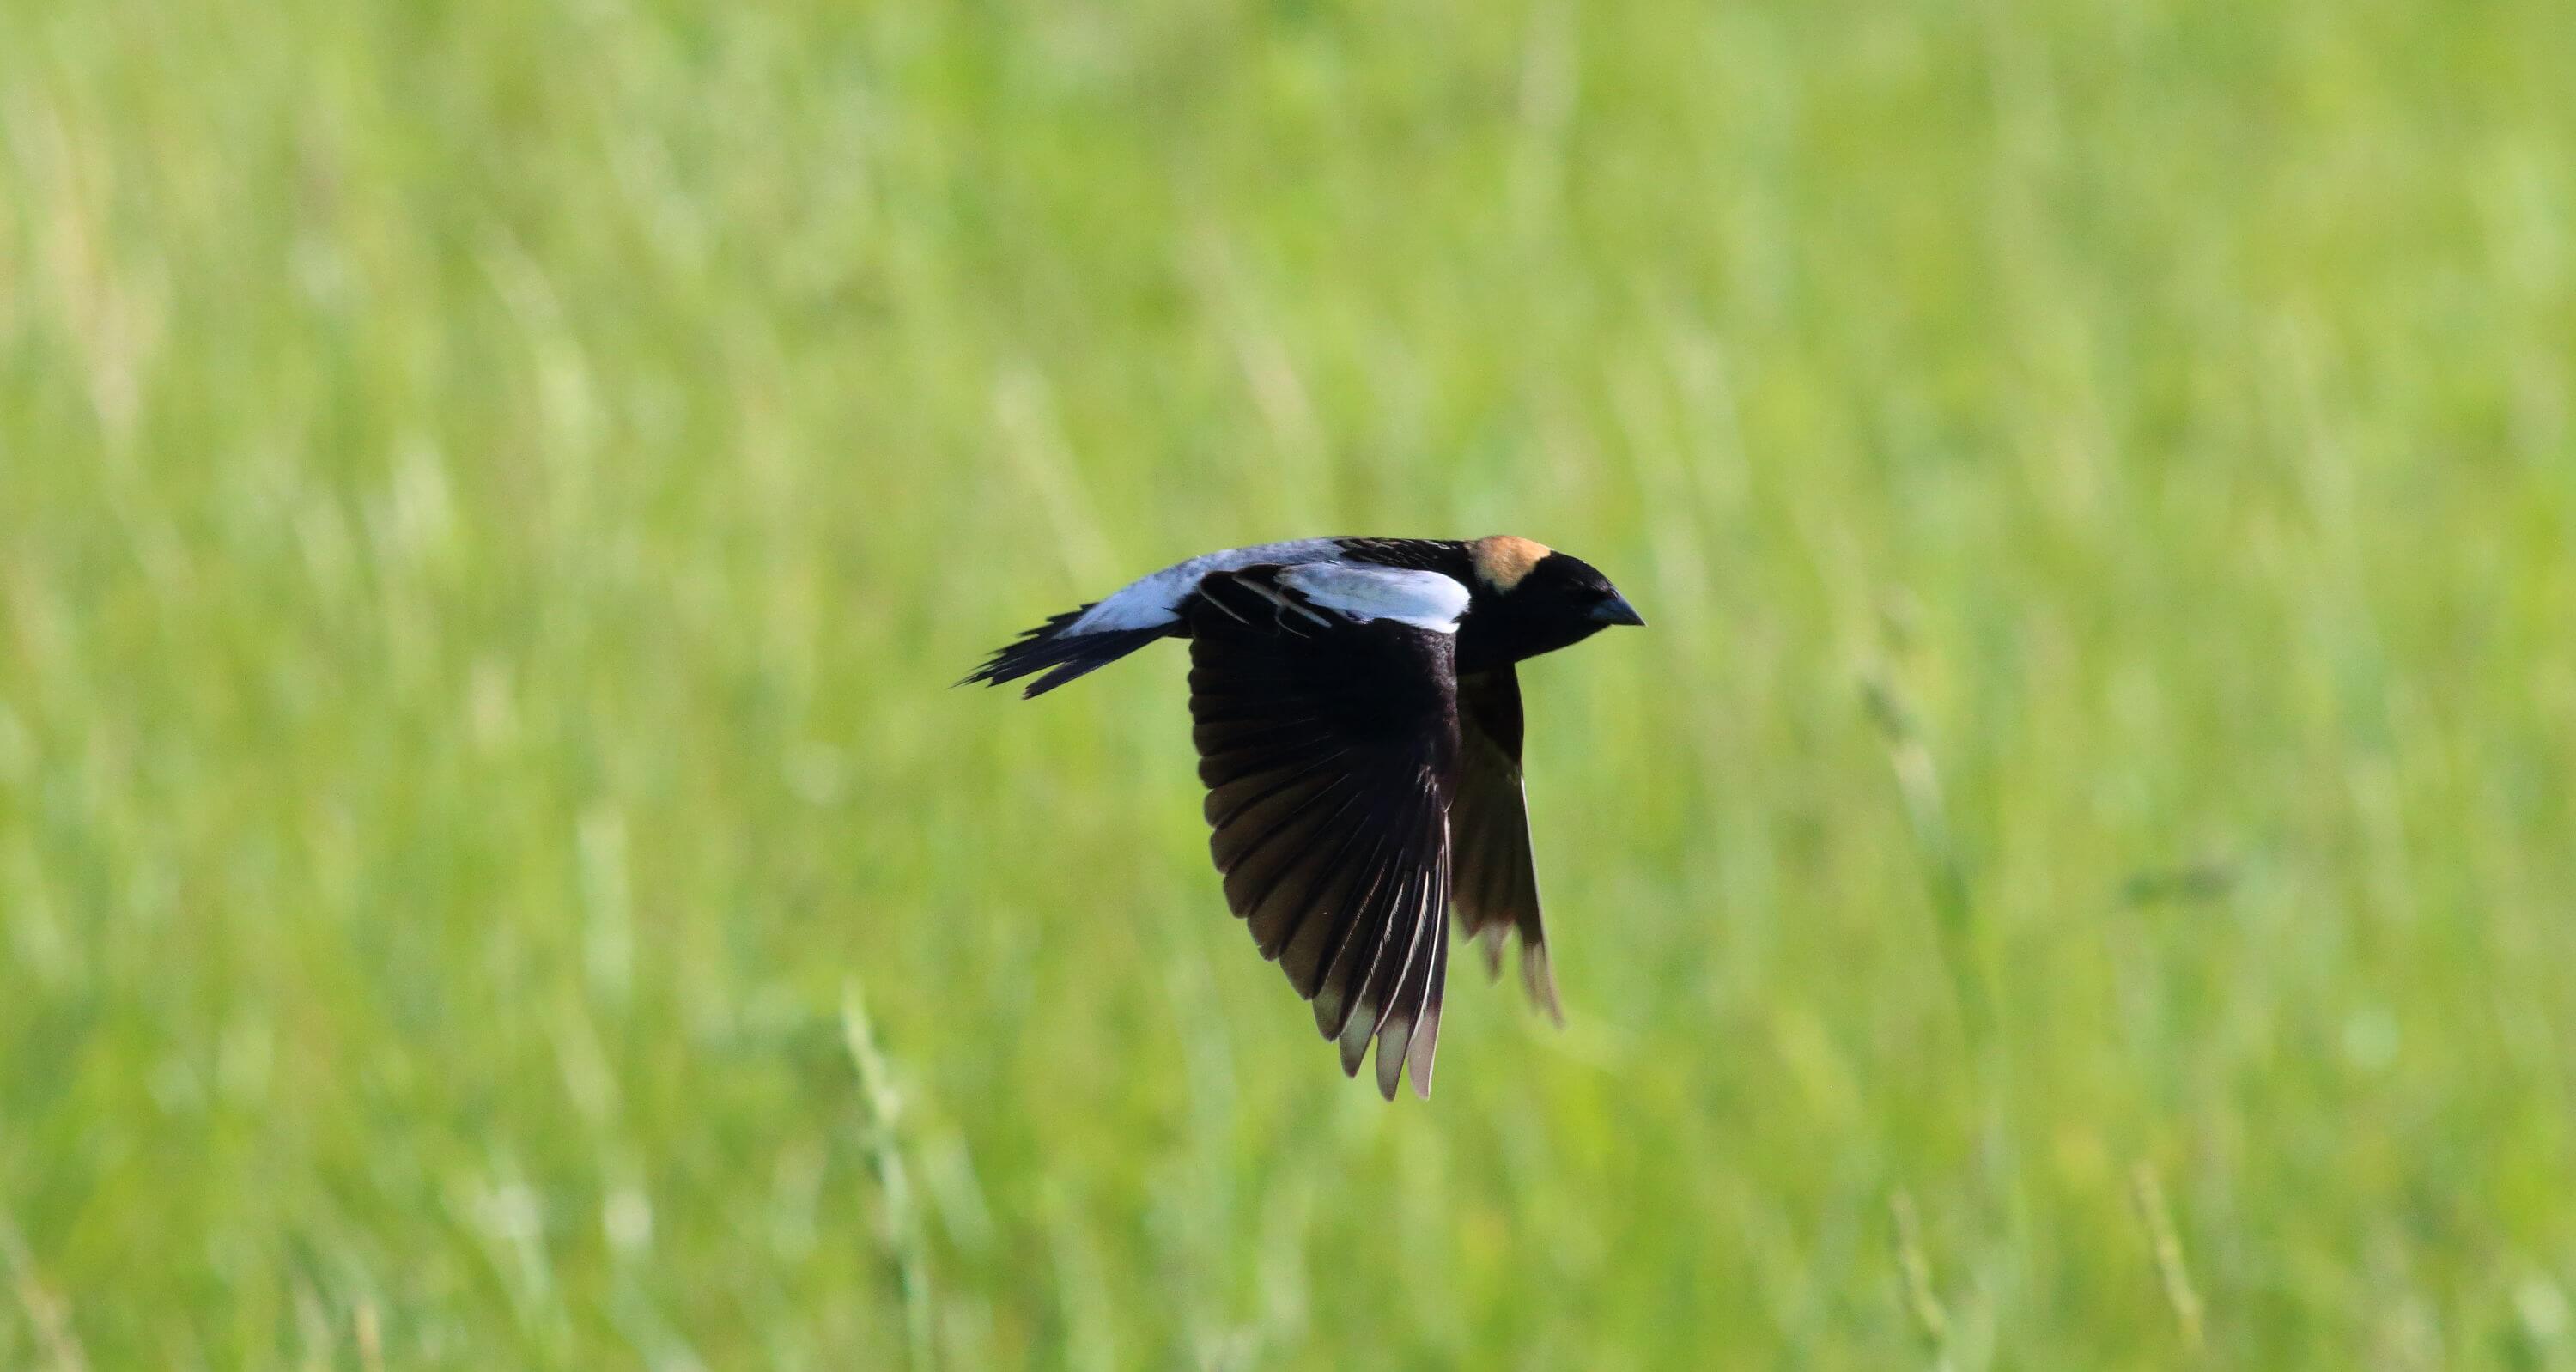 The bubbling song of the Bobolink greeted me in northern Illinois. Photo by Bruce Beehler